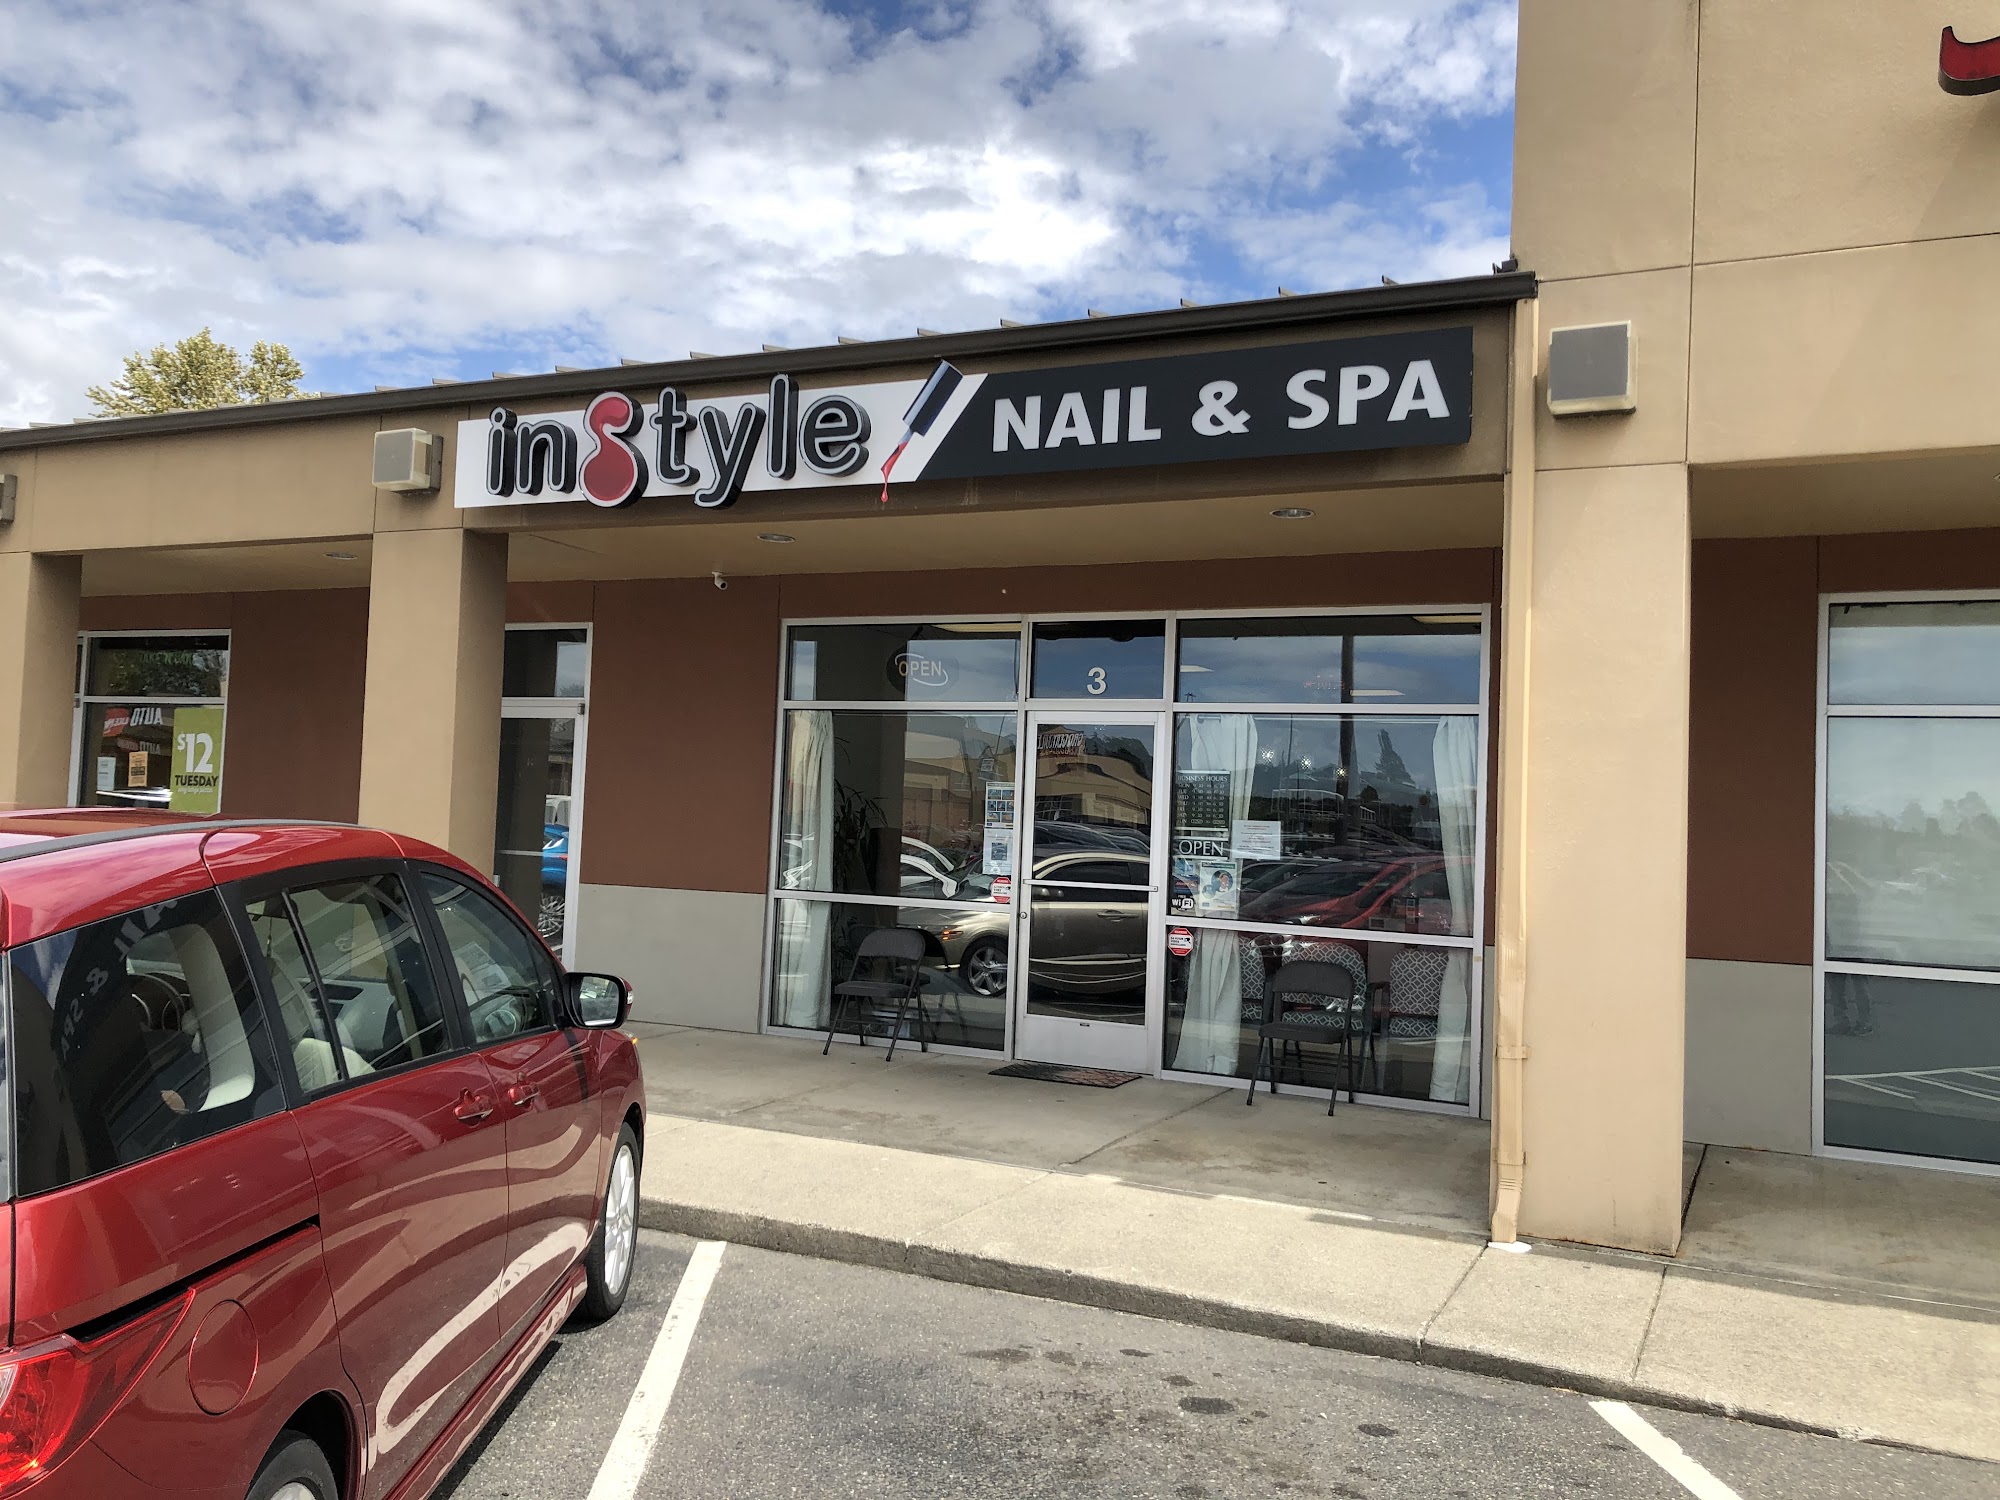 Instyle Nail and Spa